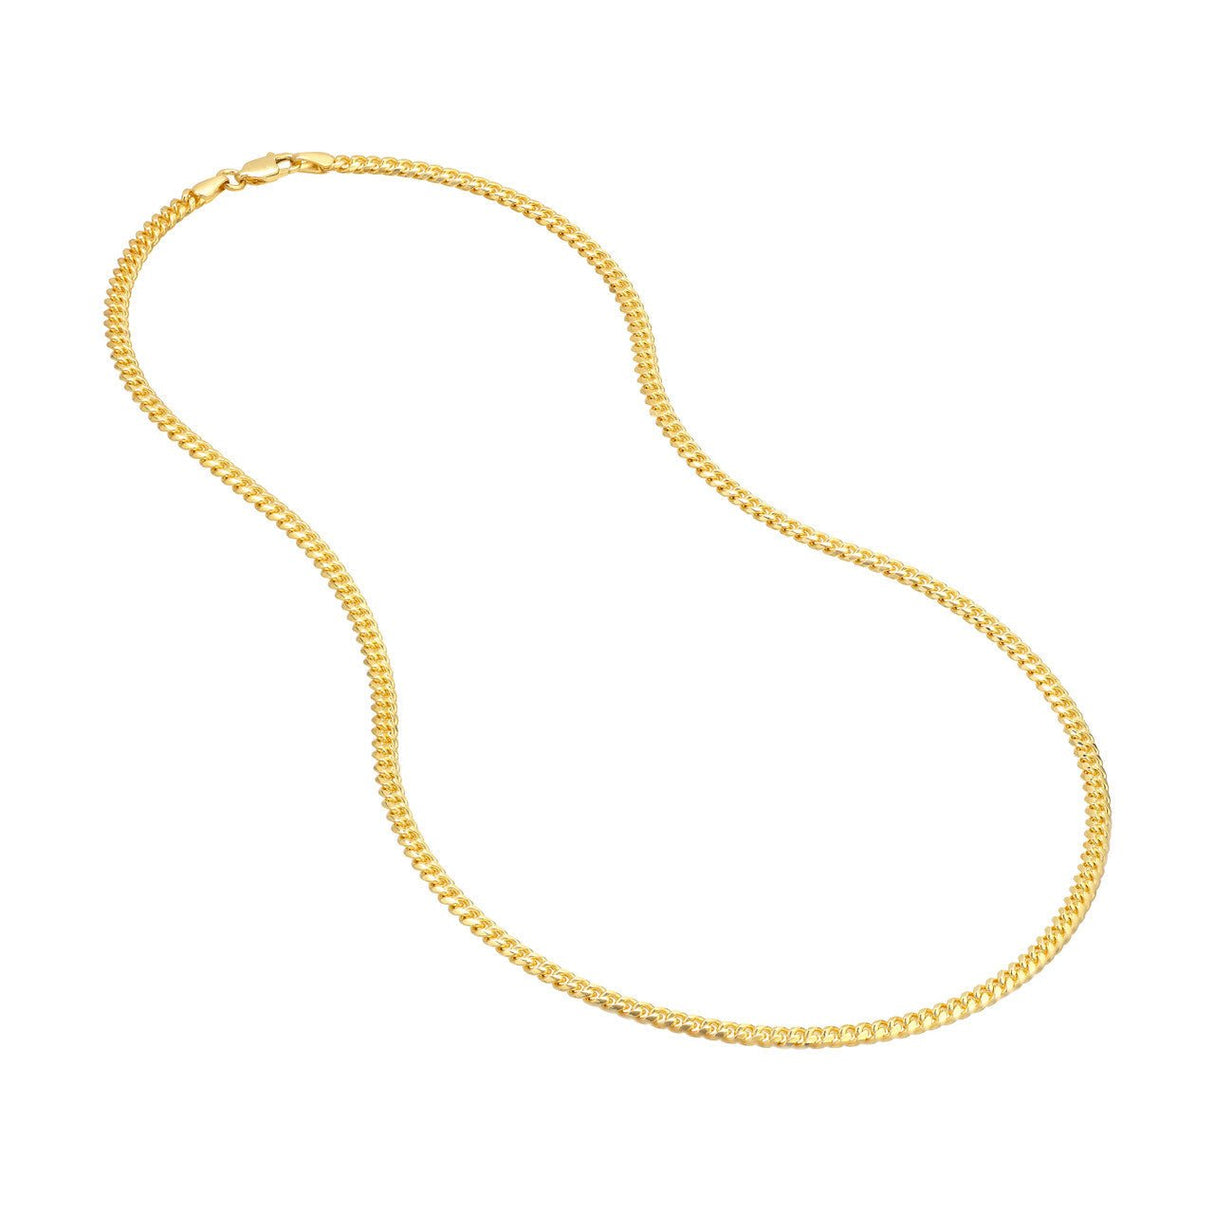 14K Gold Chain, 20", 3.5mm Miami Cuban Chain with Lobster Lock, Gold Layered Chain, Gold Necklaces, Gold Choker, - Diamond Origin